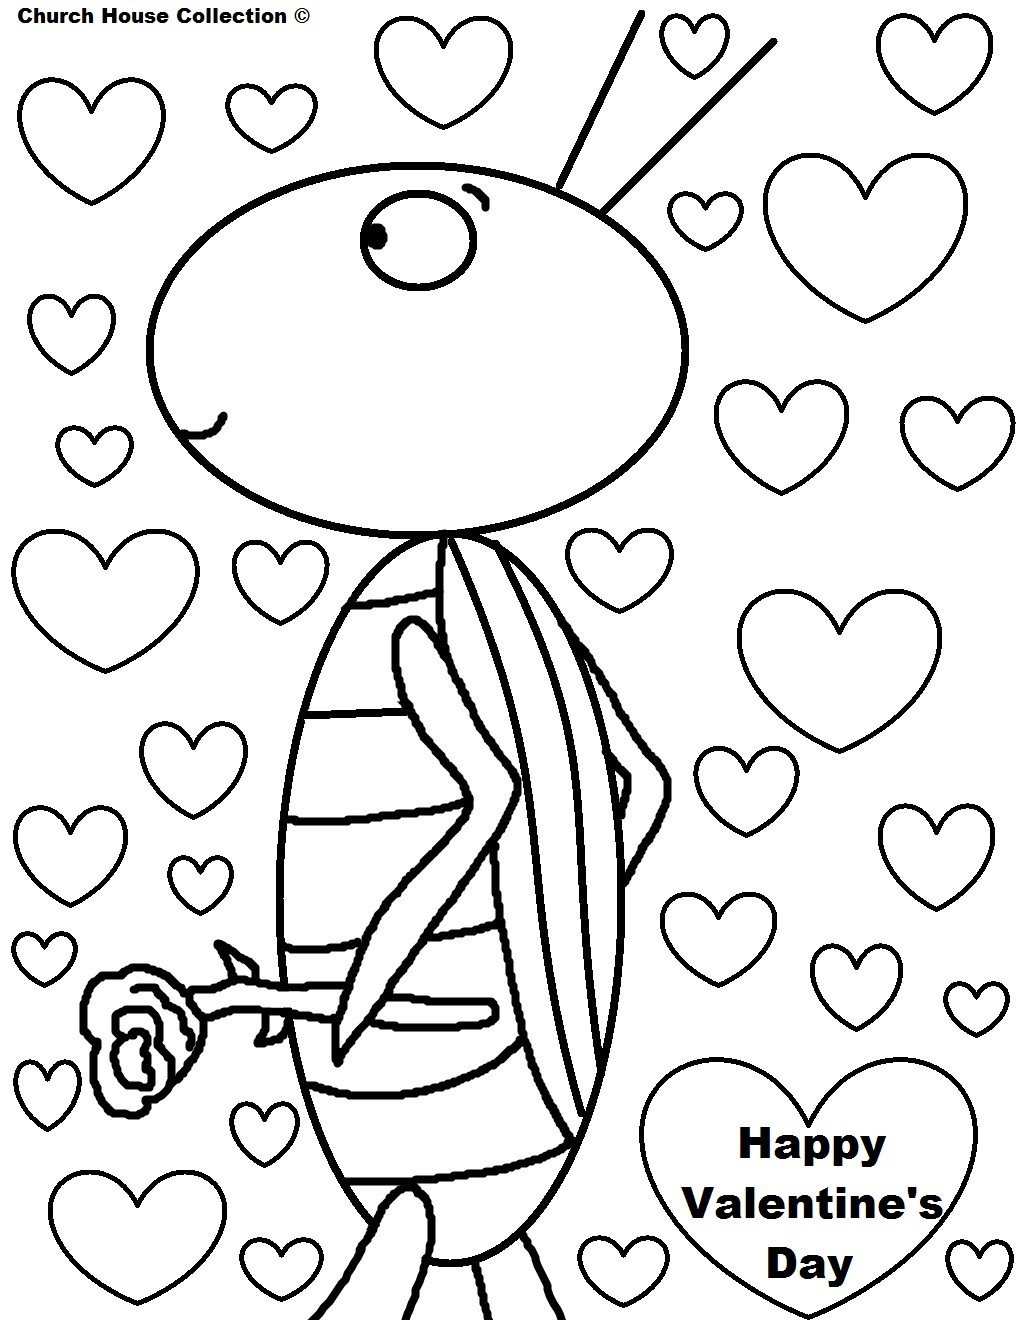 Coloring Pages For Valentines Day Printable
 Church House Collection Blog Valentine s Day Coloring